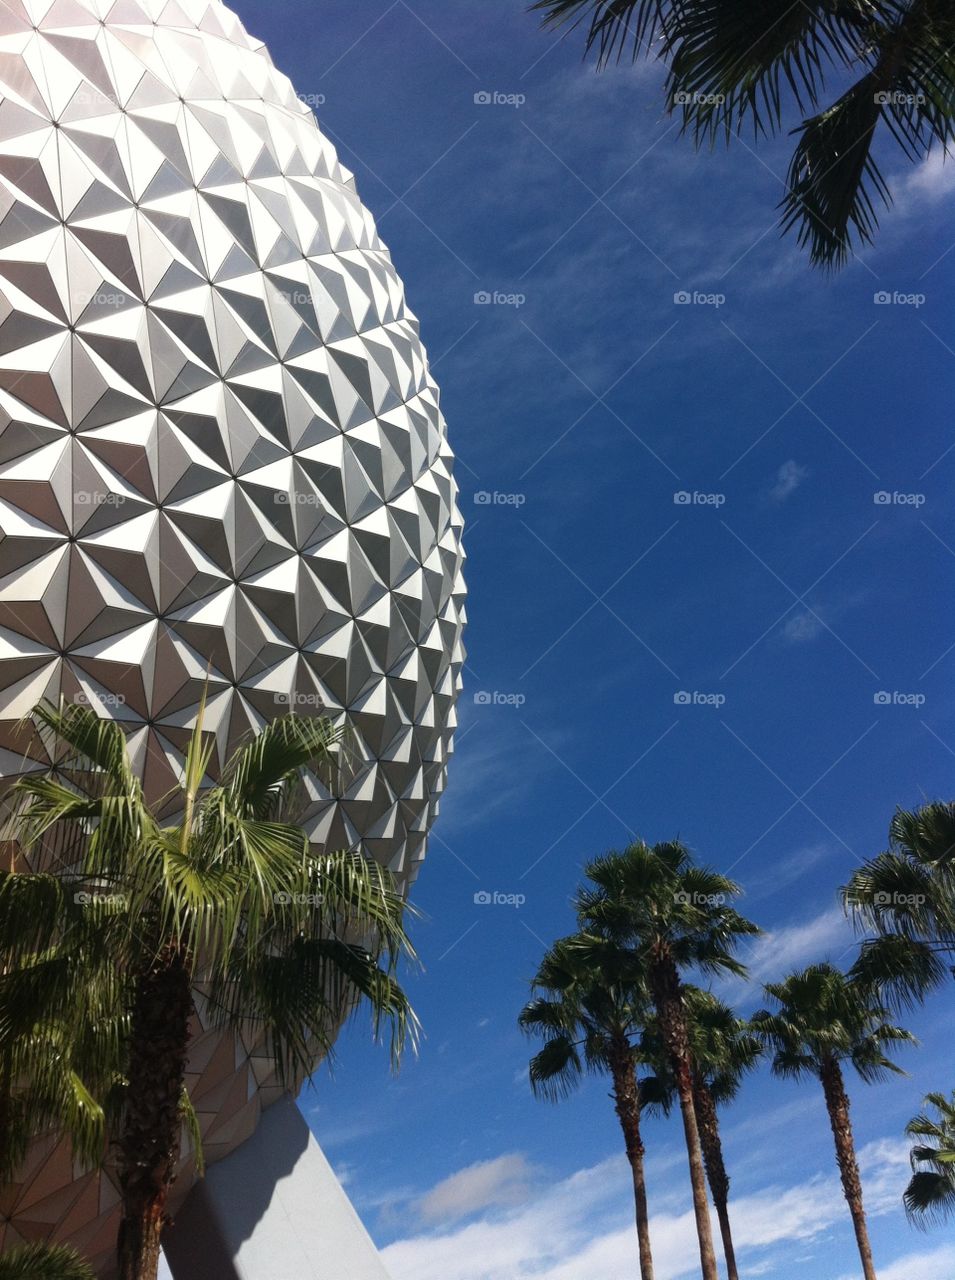 Spaceship Earth in Daylight. Spaceship Earth ride at Disney World in Florida.